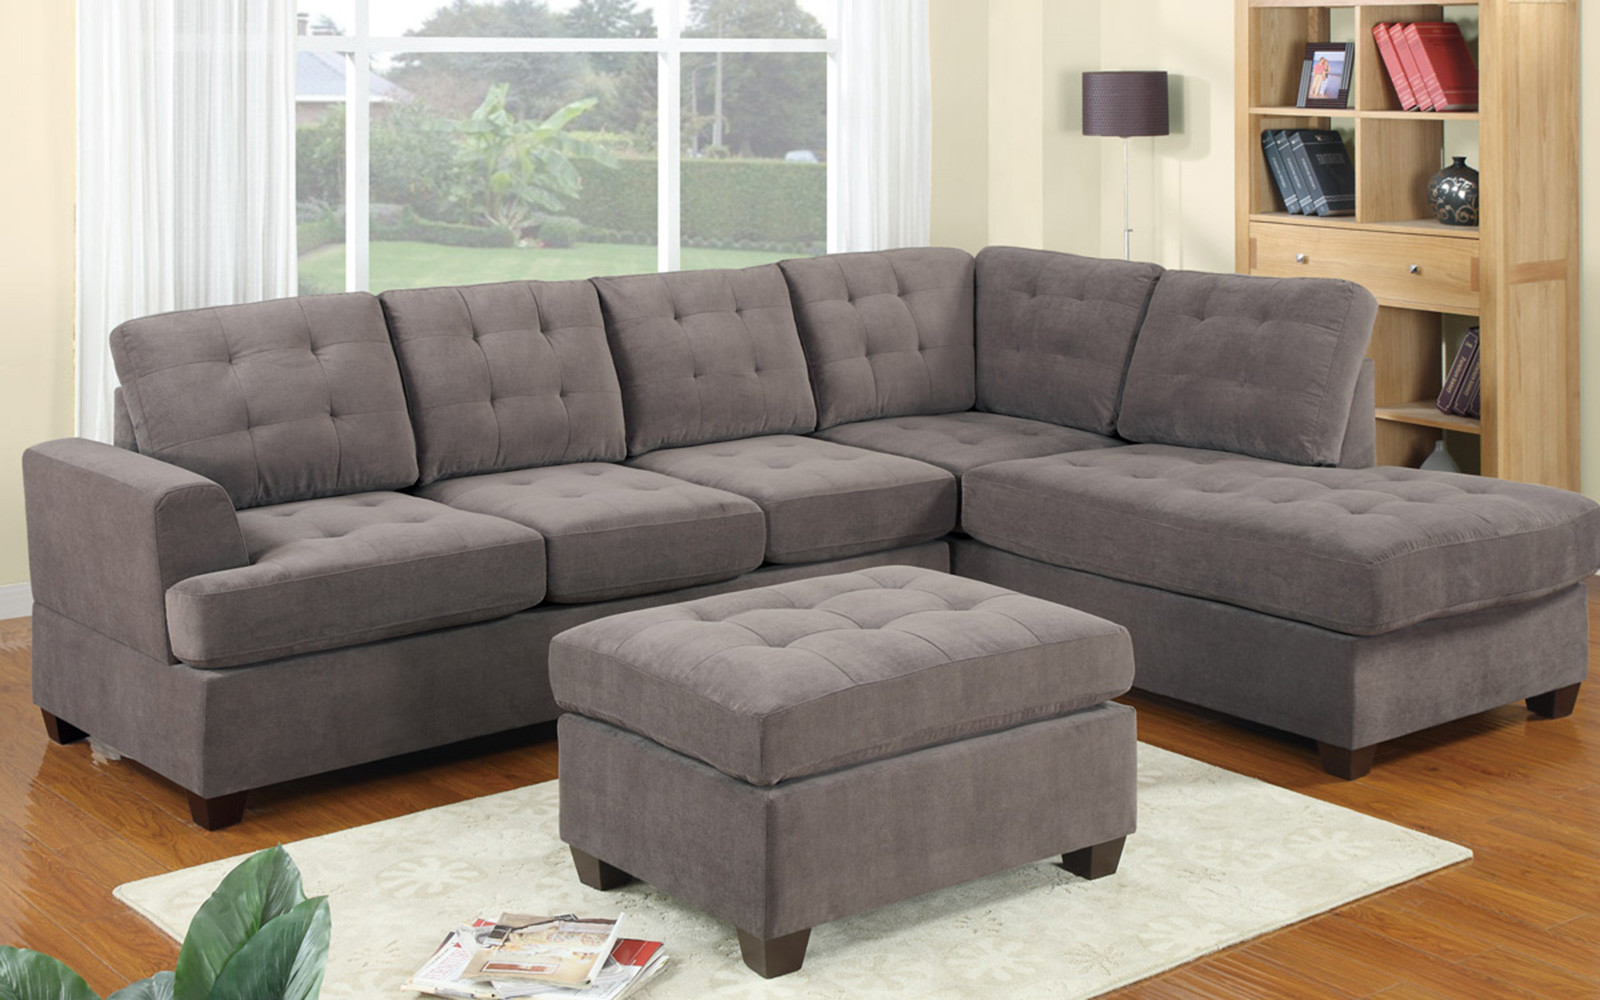 2 Piece Modern Reversible Grey Tufted Microfiber Sectional Sofa with  Ottoman - Traveller Location